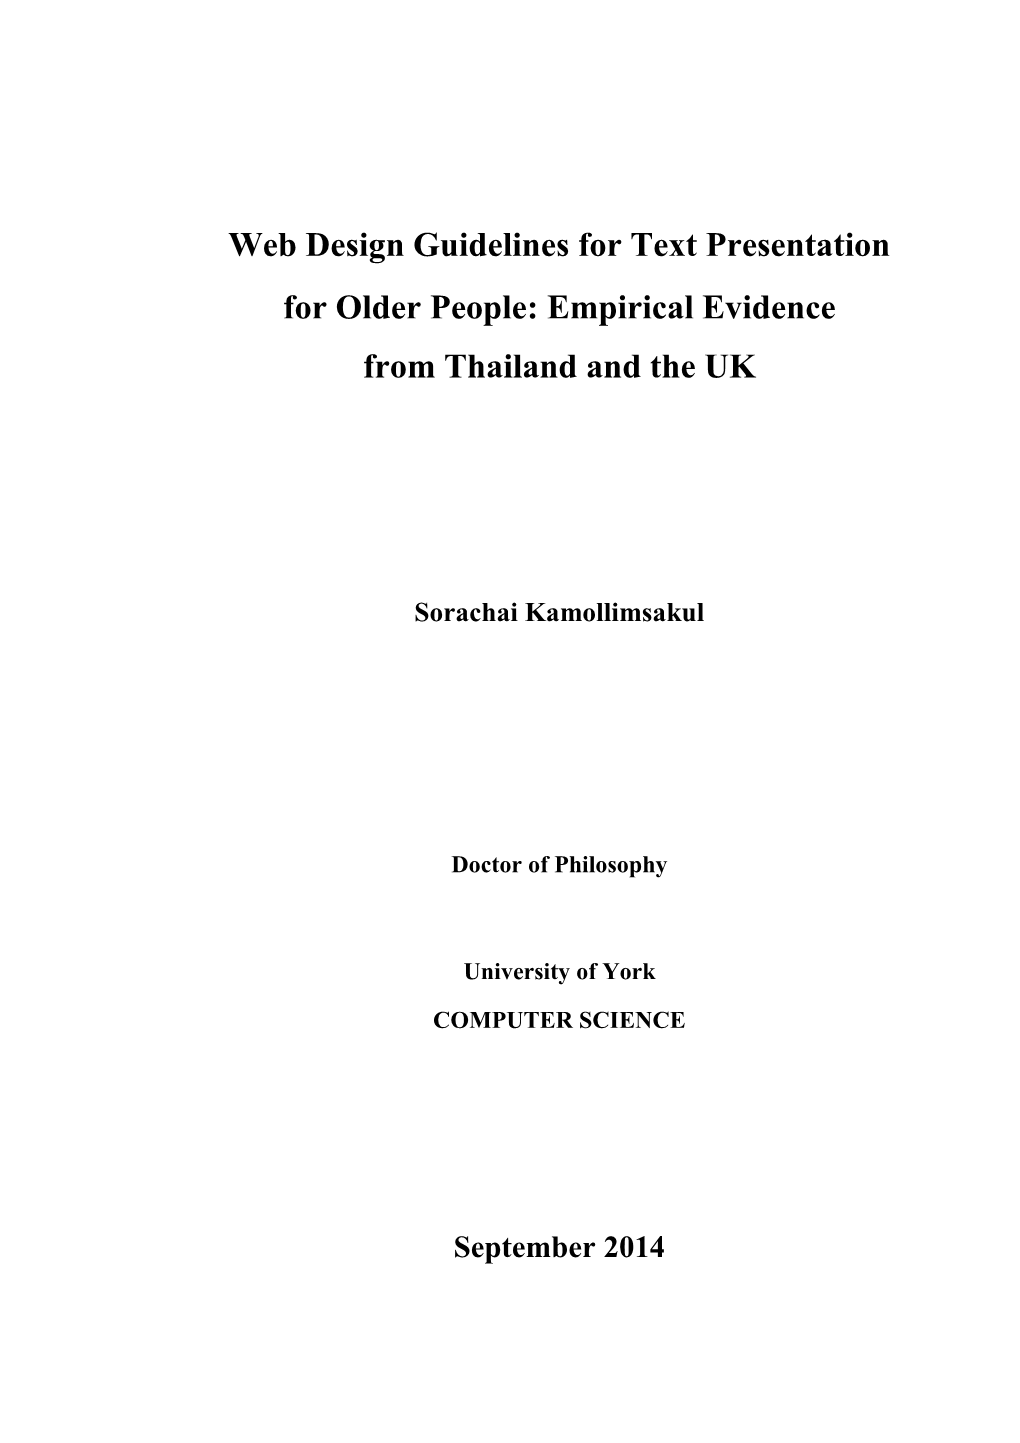 Web Design Guidelines for Text Presentation for Older People: Empirical Evidence from Thailand and the UK